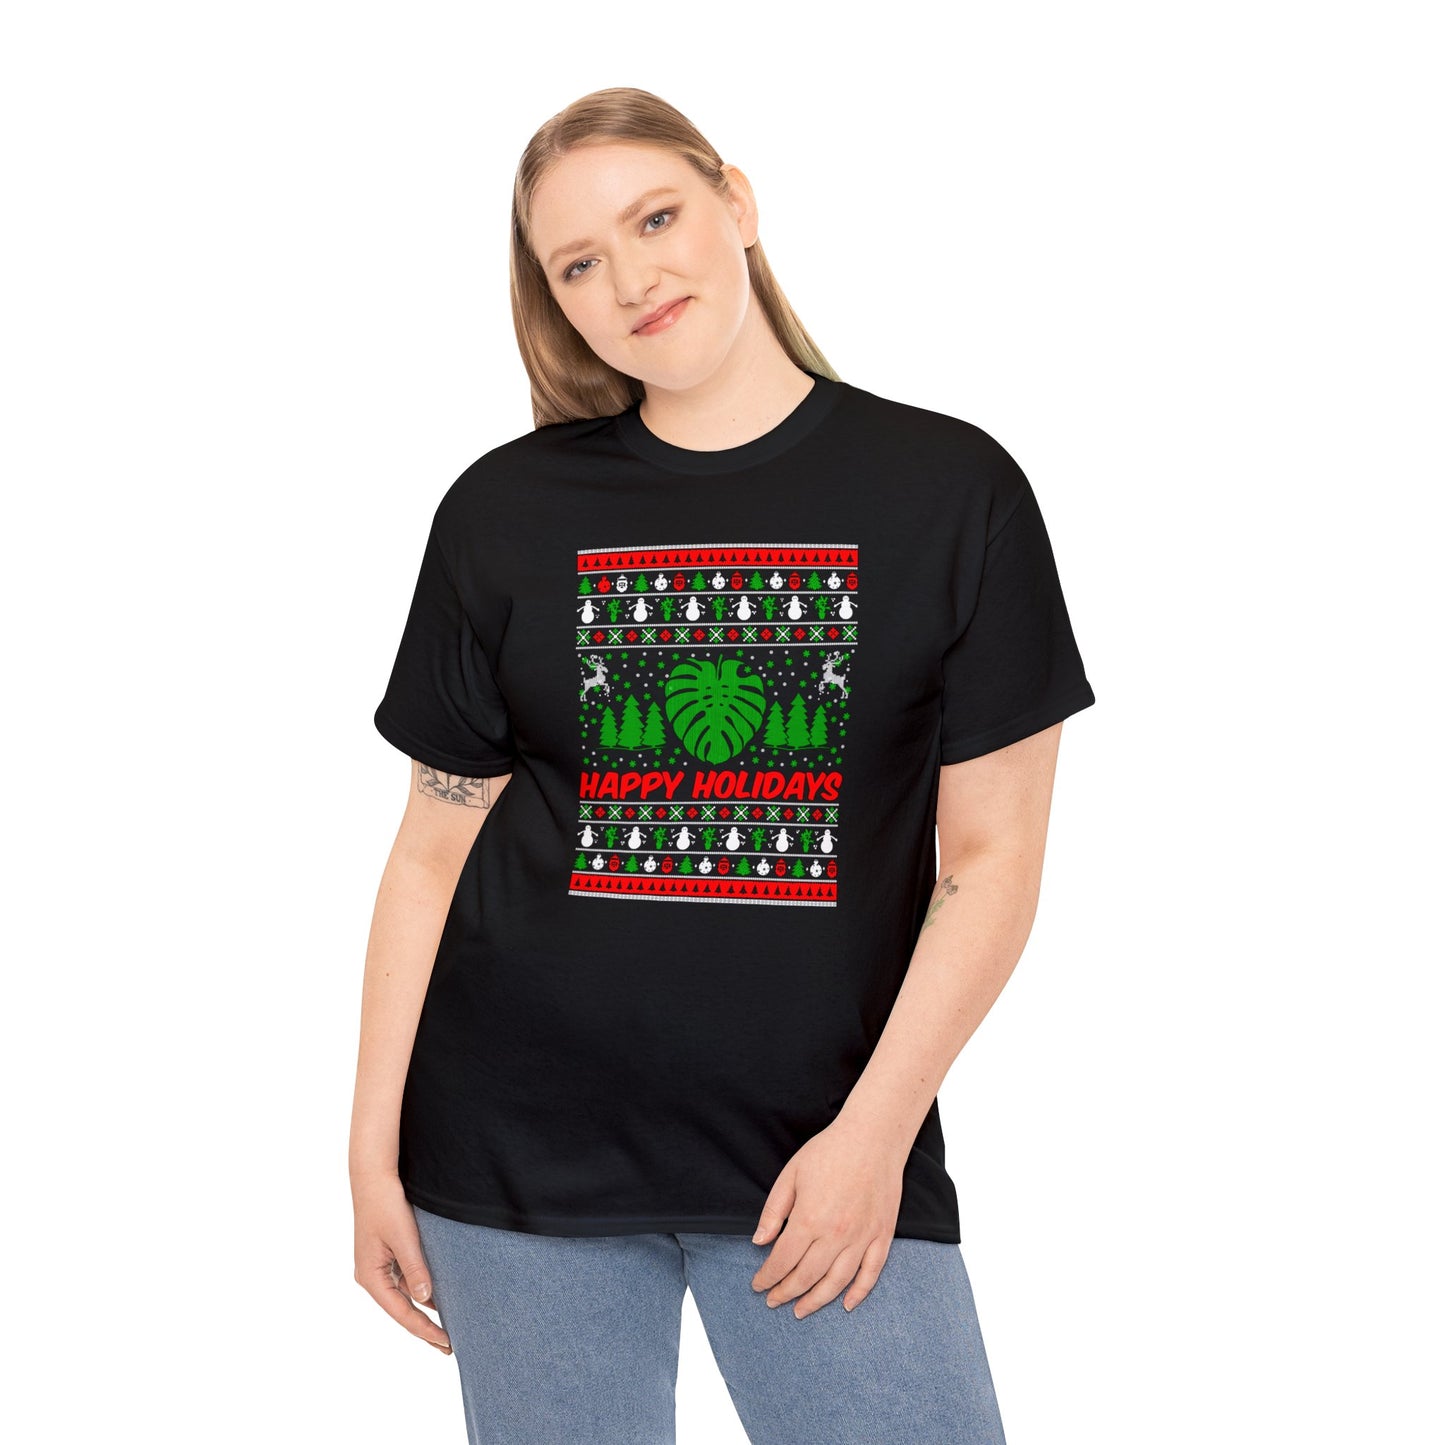 Happy holidays christmas ugly Sweater. Plant lover ugly sweater. Monstera leaf long sleeve. Plant dad christmas ugly sweater. Plant shirt